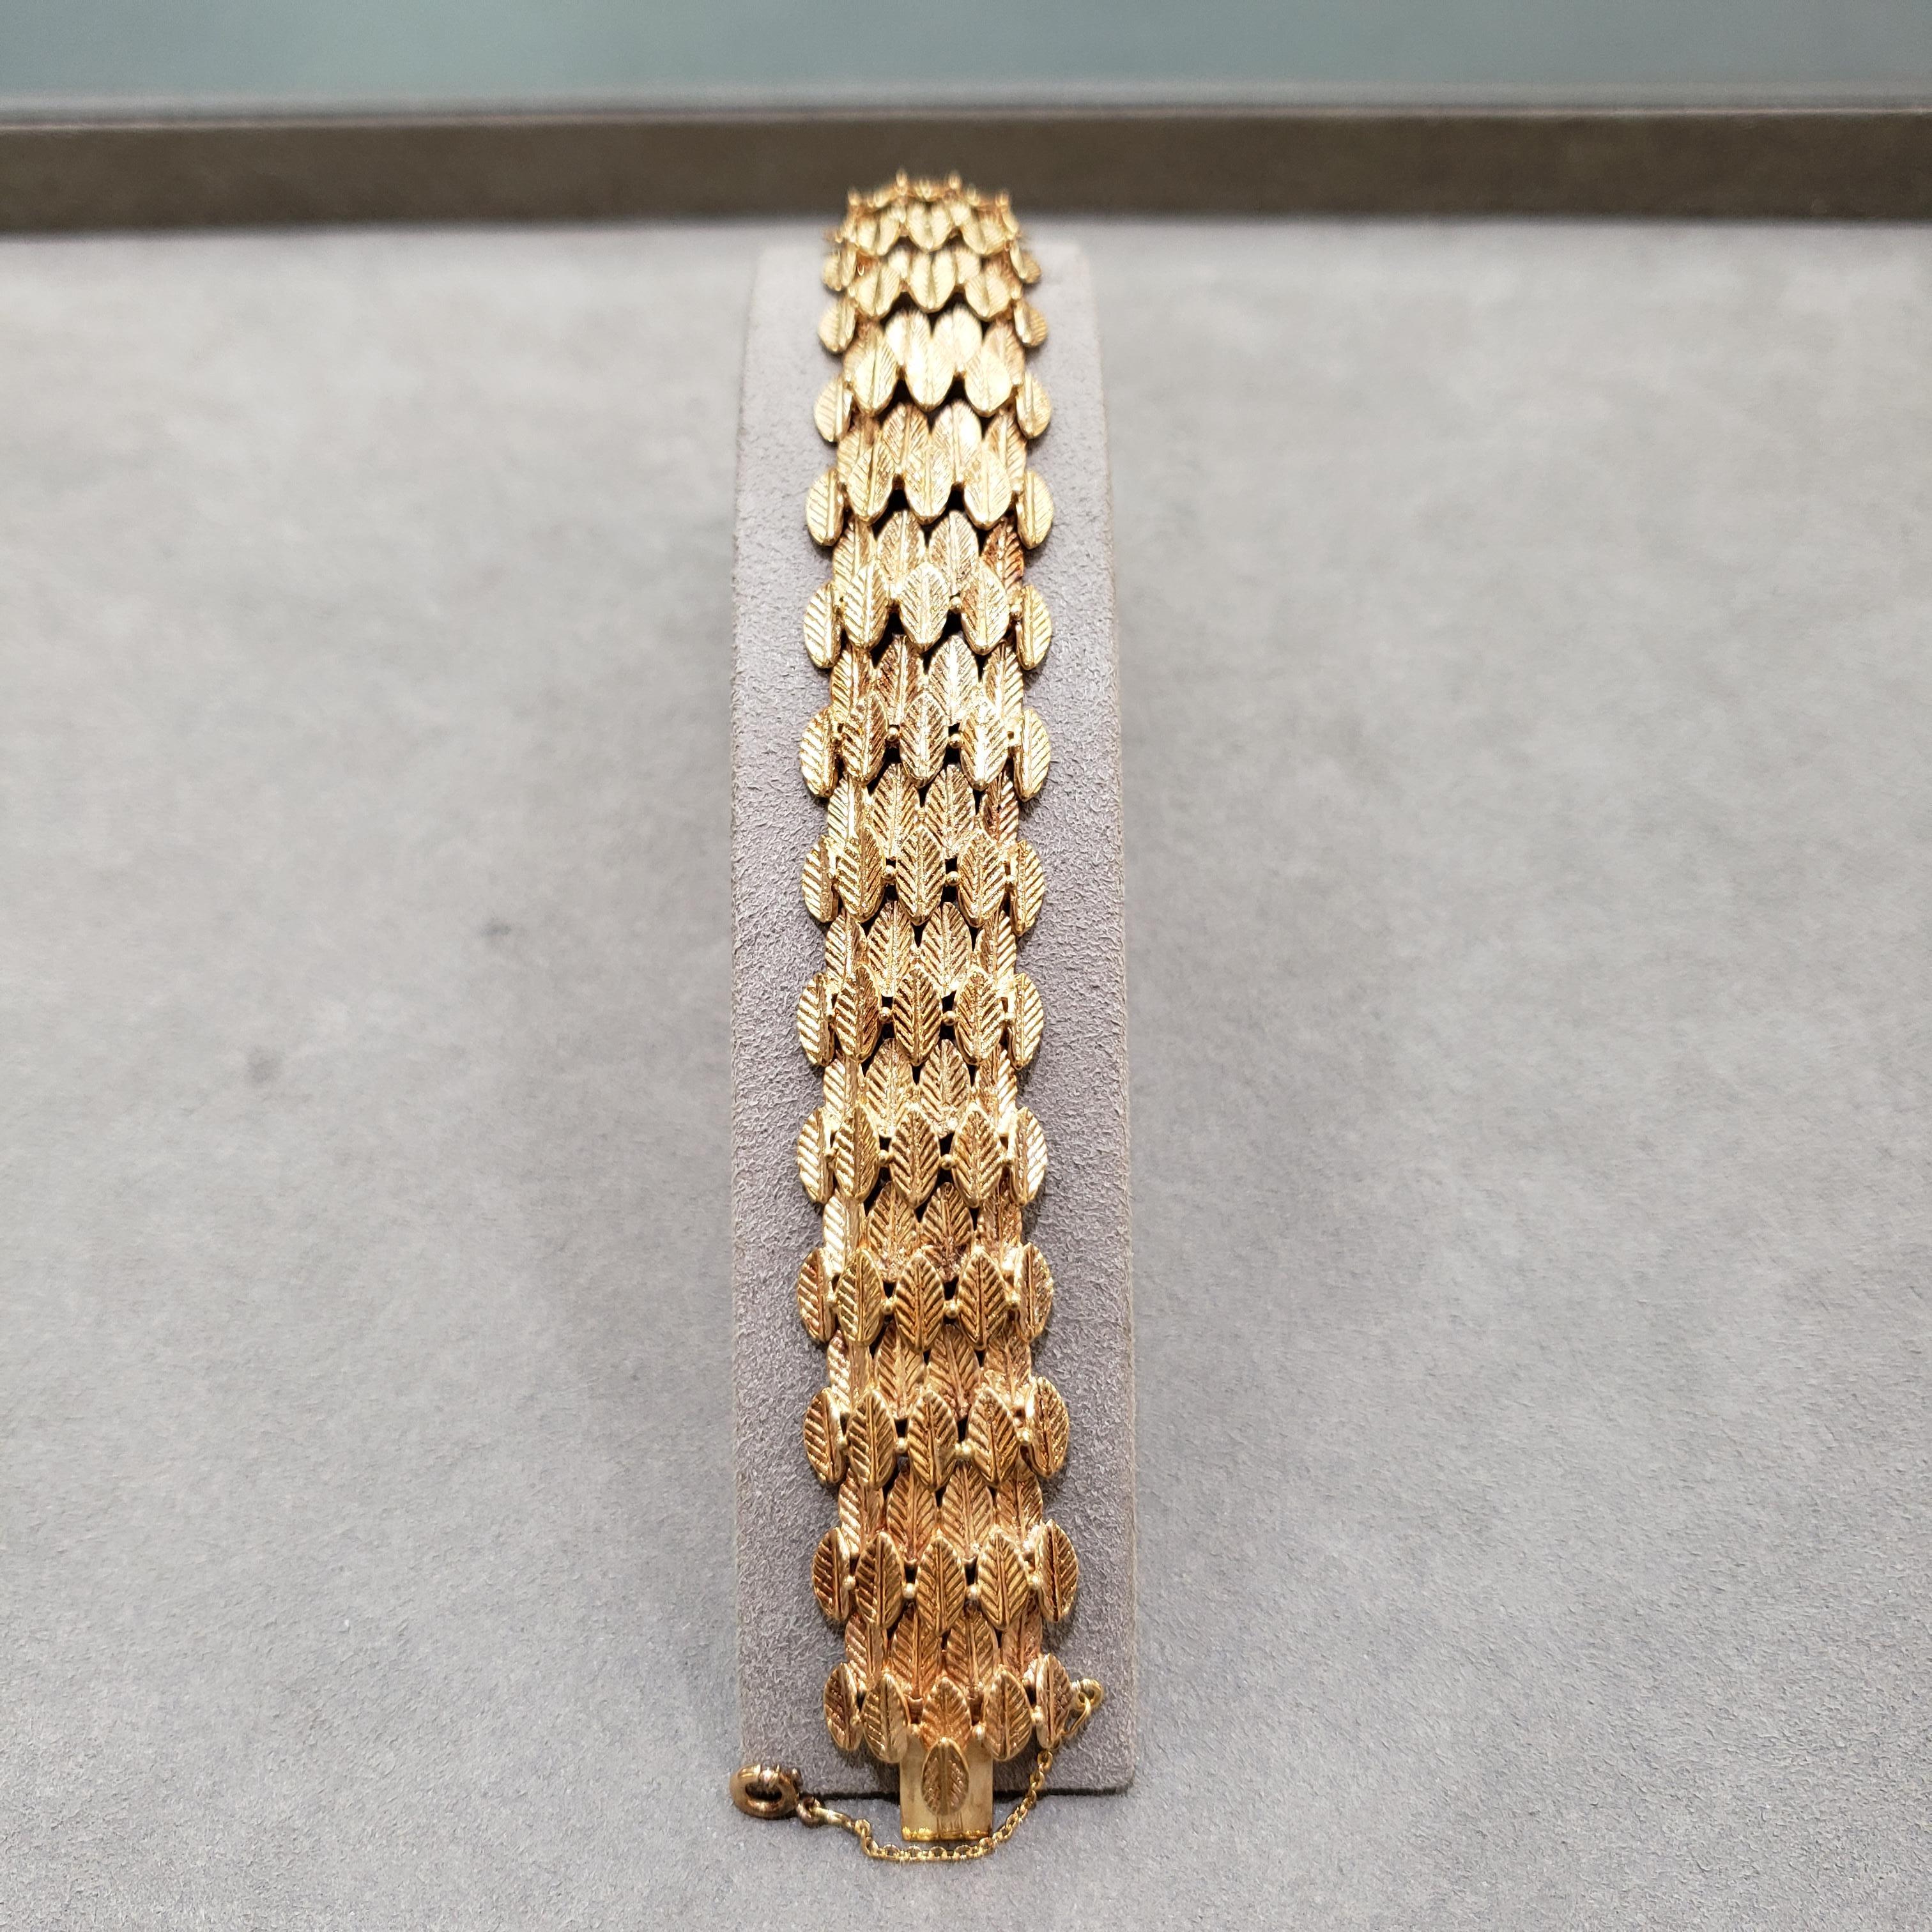 Features nine rows of golden leaves made in 18 karat yellow gold. Approximately 7 inches in length; 44.56 grams.